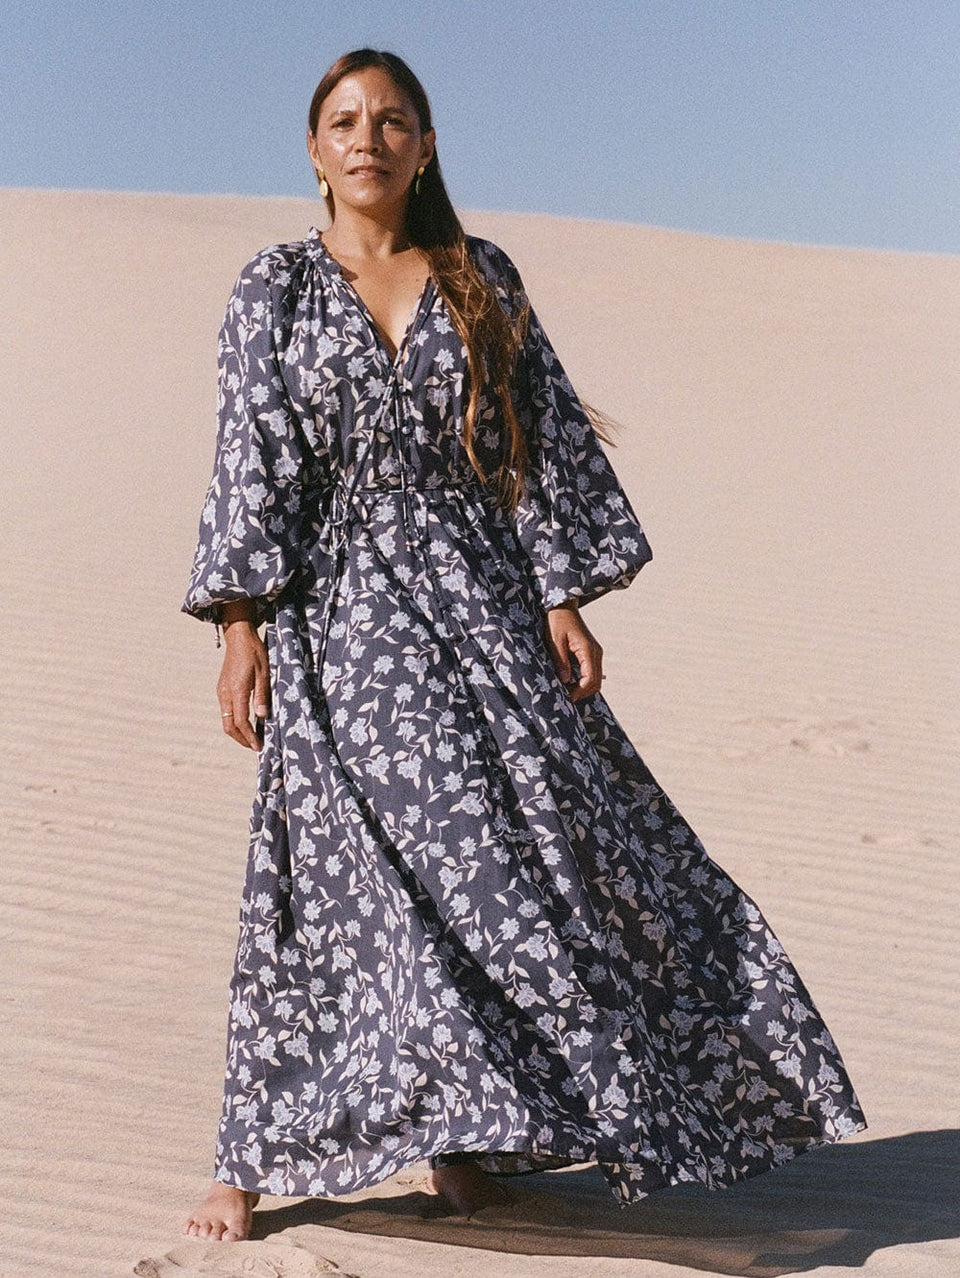 First Nations elder, Mary Pappin, in Mungo National Park wearing the KIVARI Jeanne Maxi Dress: A navy and sky blue floral dress made from cotton and featuring a button front, waist tie, full-length blouson sleeves and frill collar detail.